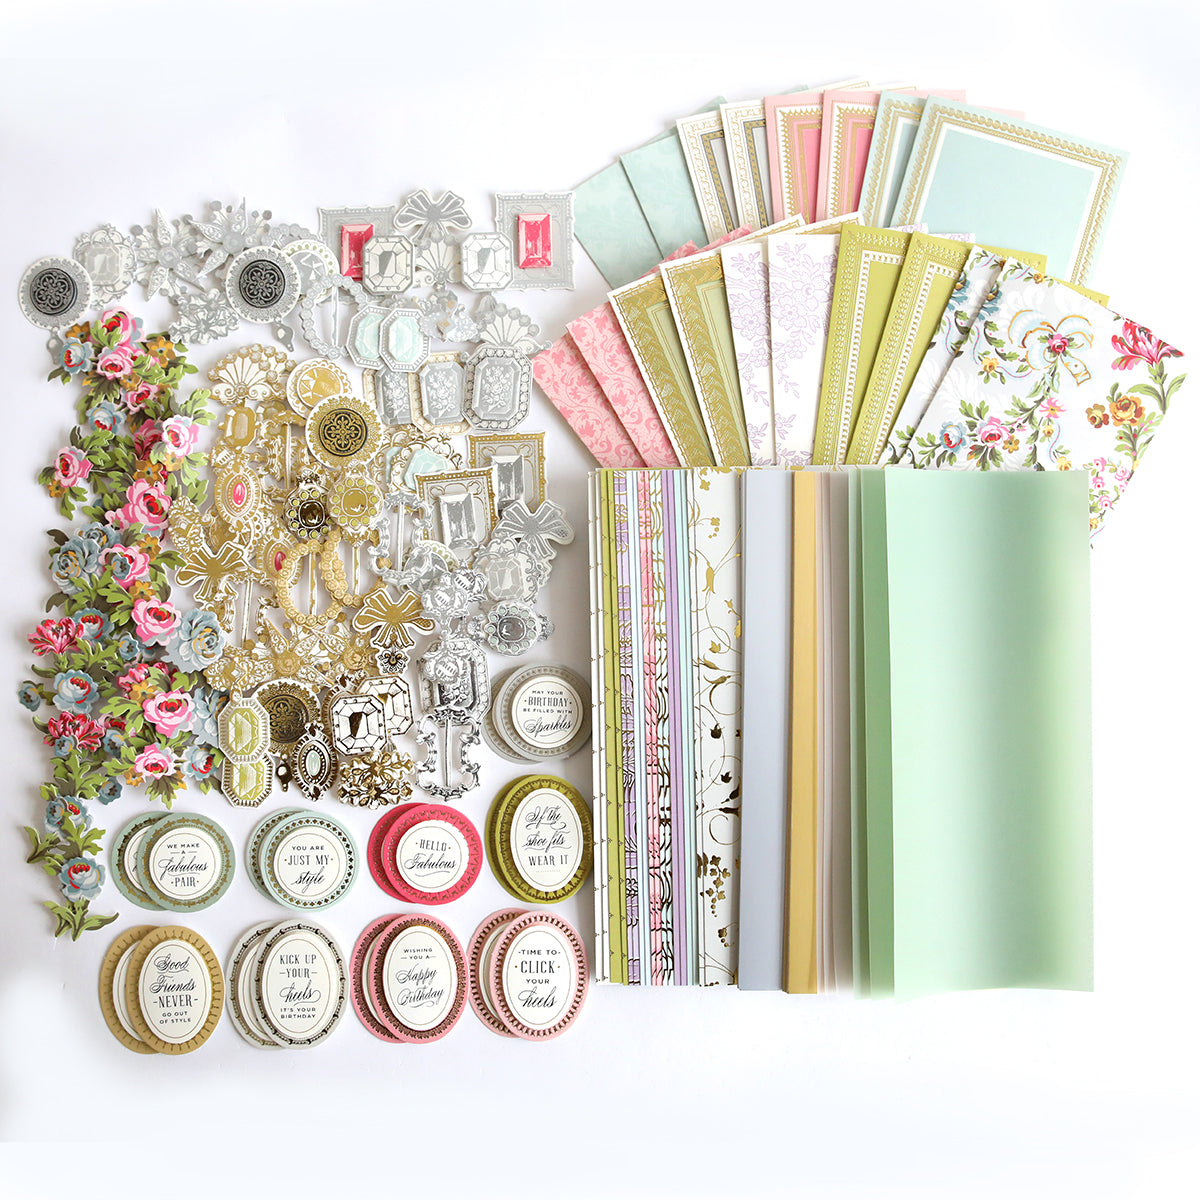 A collection of Paper Shoes Finishing School Refill Kit supplies, including cardstock and embellishments.